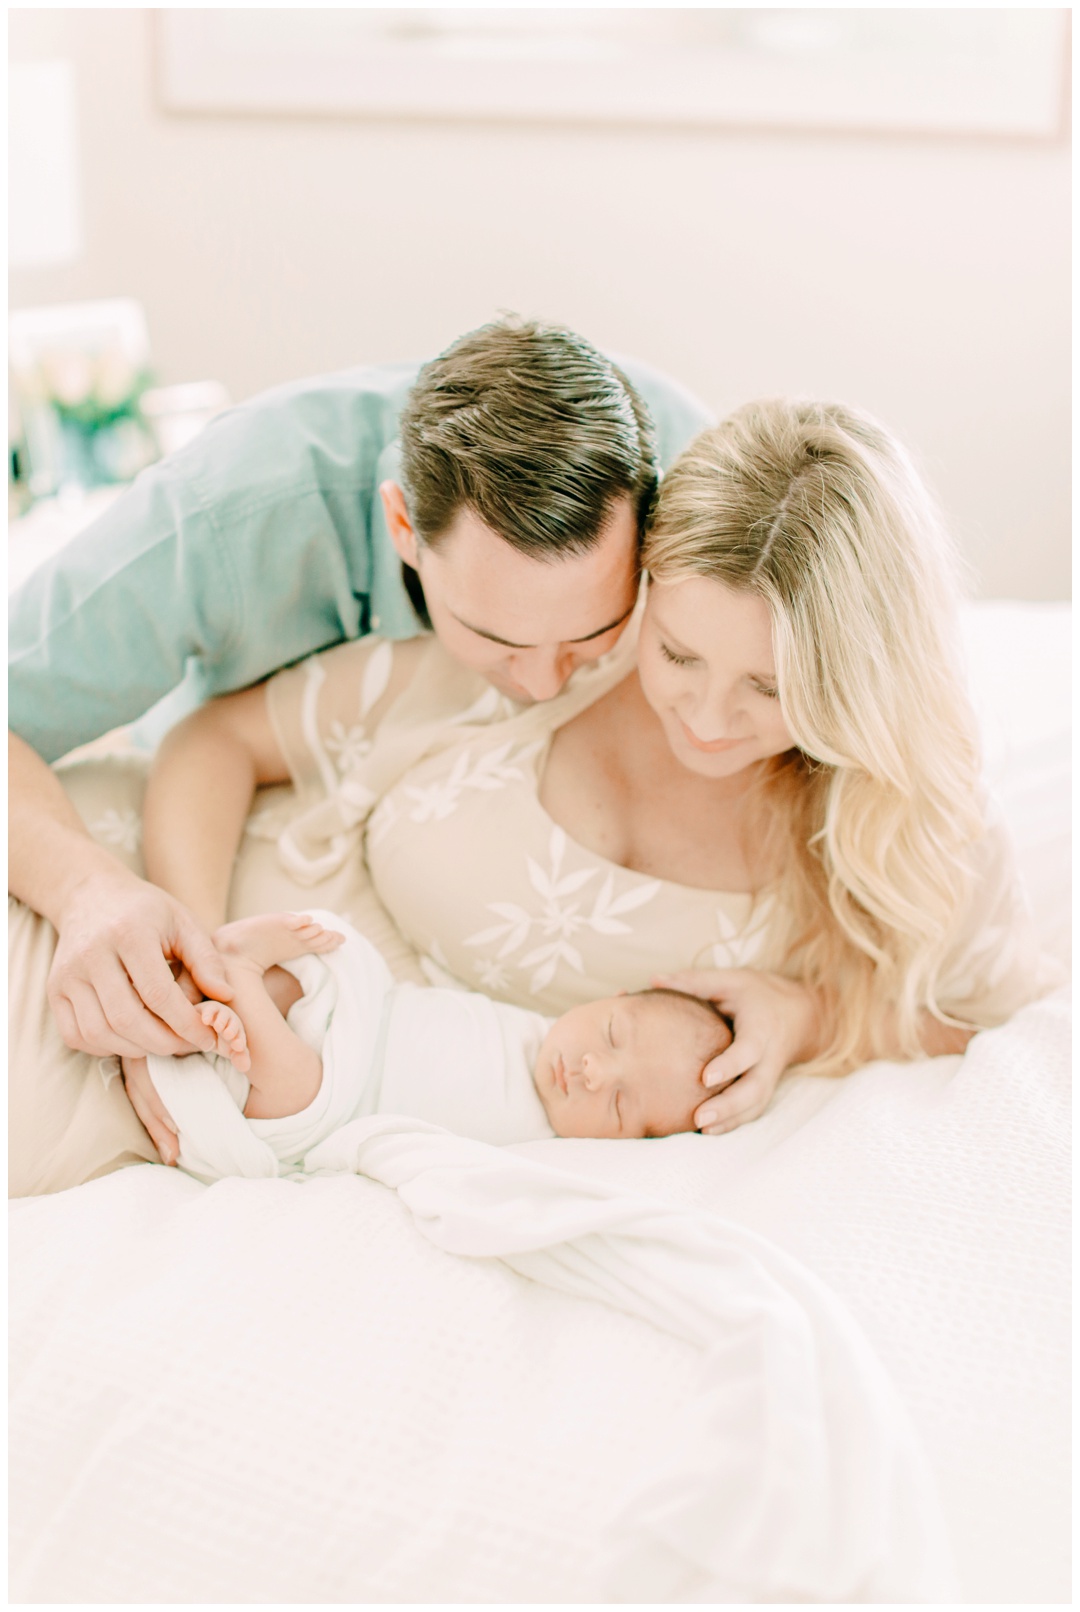 The_Moore's_Family_Newport_Beach_Lifestyle_Family_Photographer_Orange_County_Family_Photography_Cori_Kleckner_Photography_Orange_County_Newborn_Photographer_Family_Photos_Session__1403.jpg